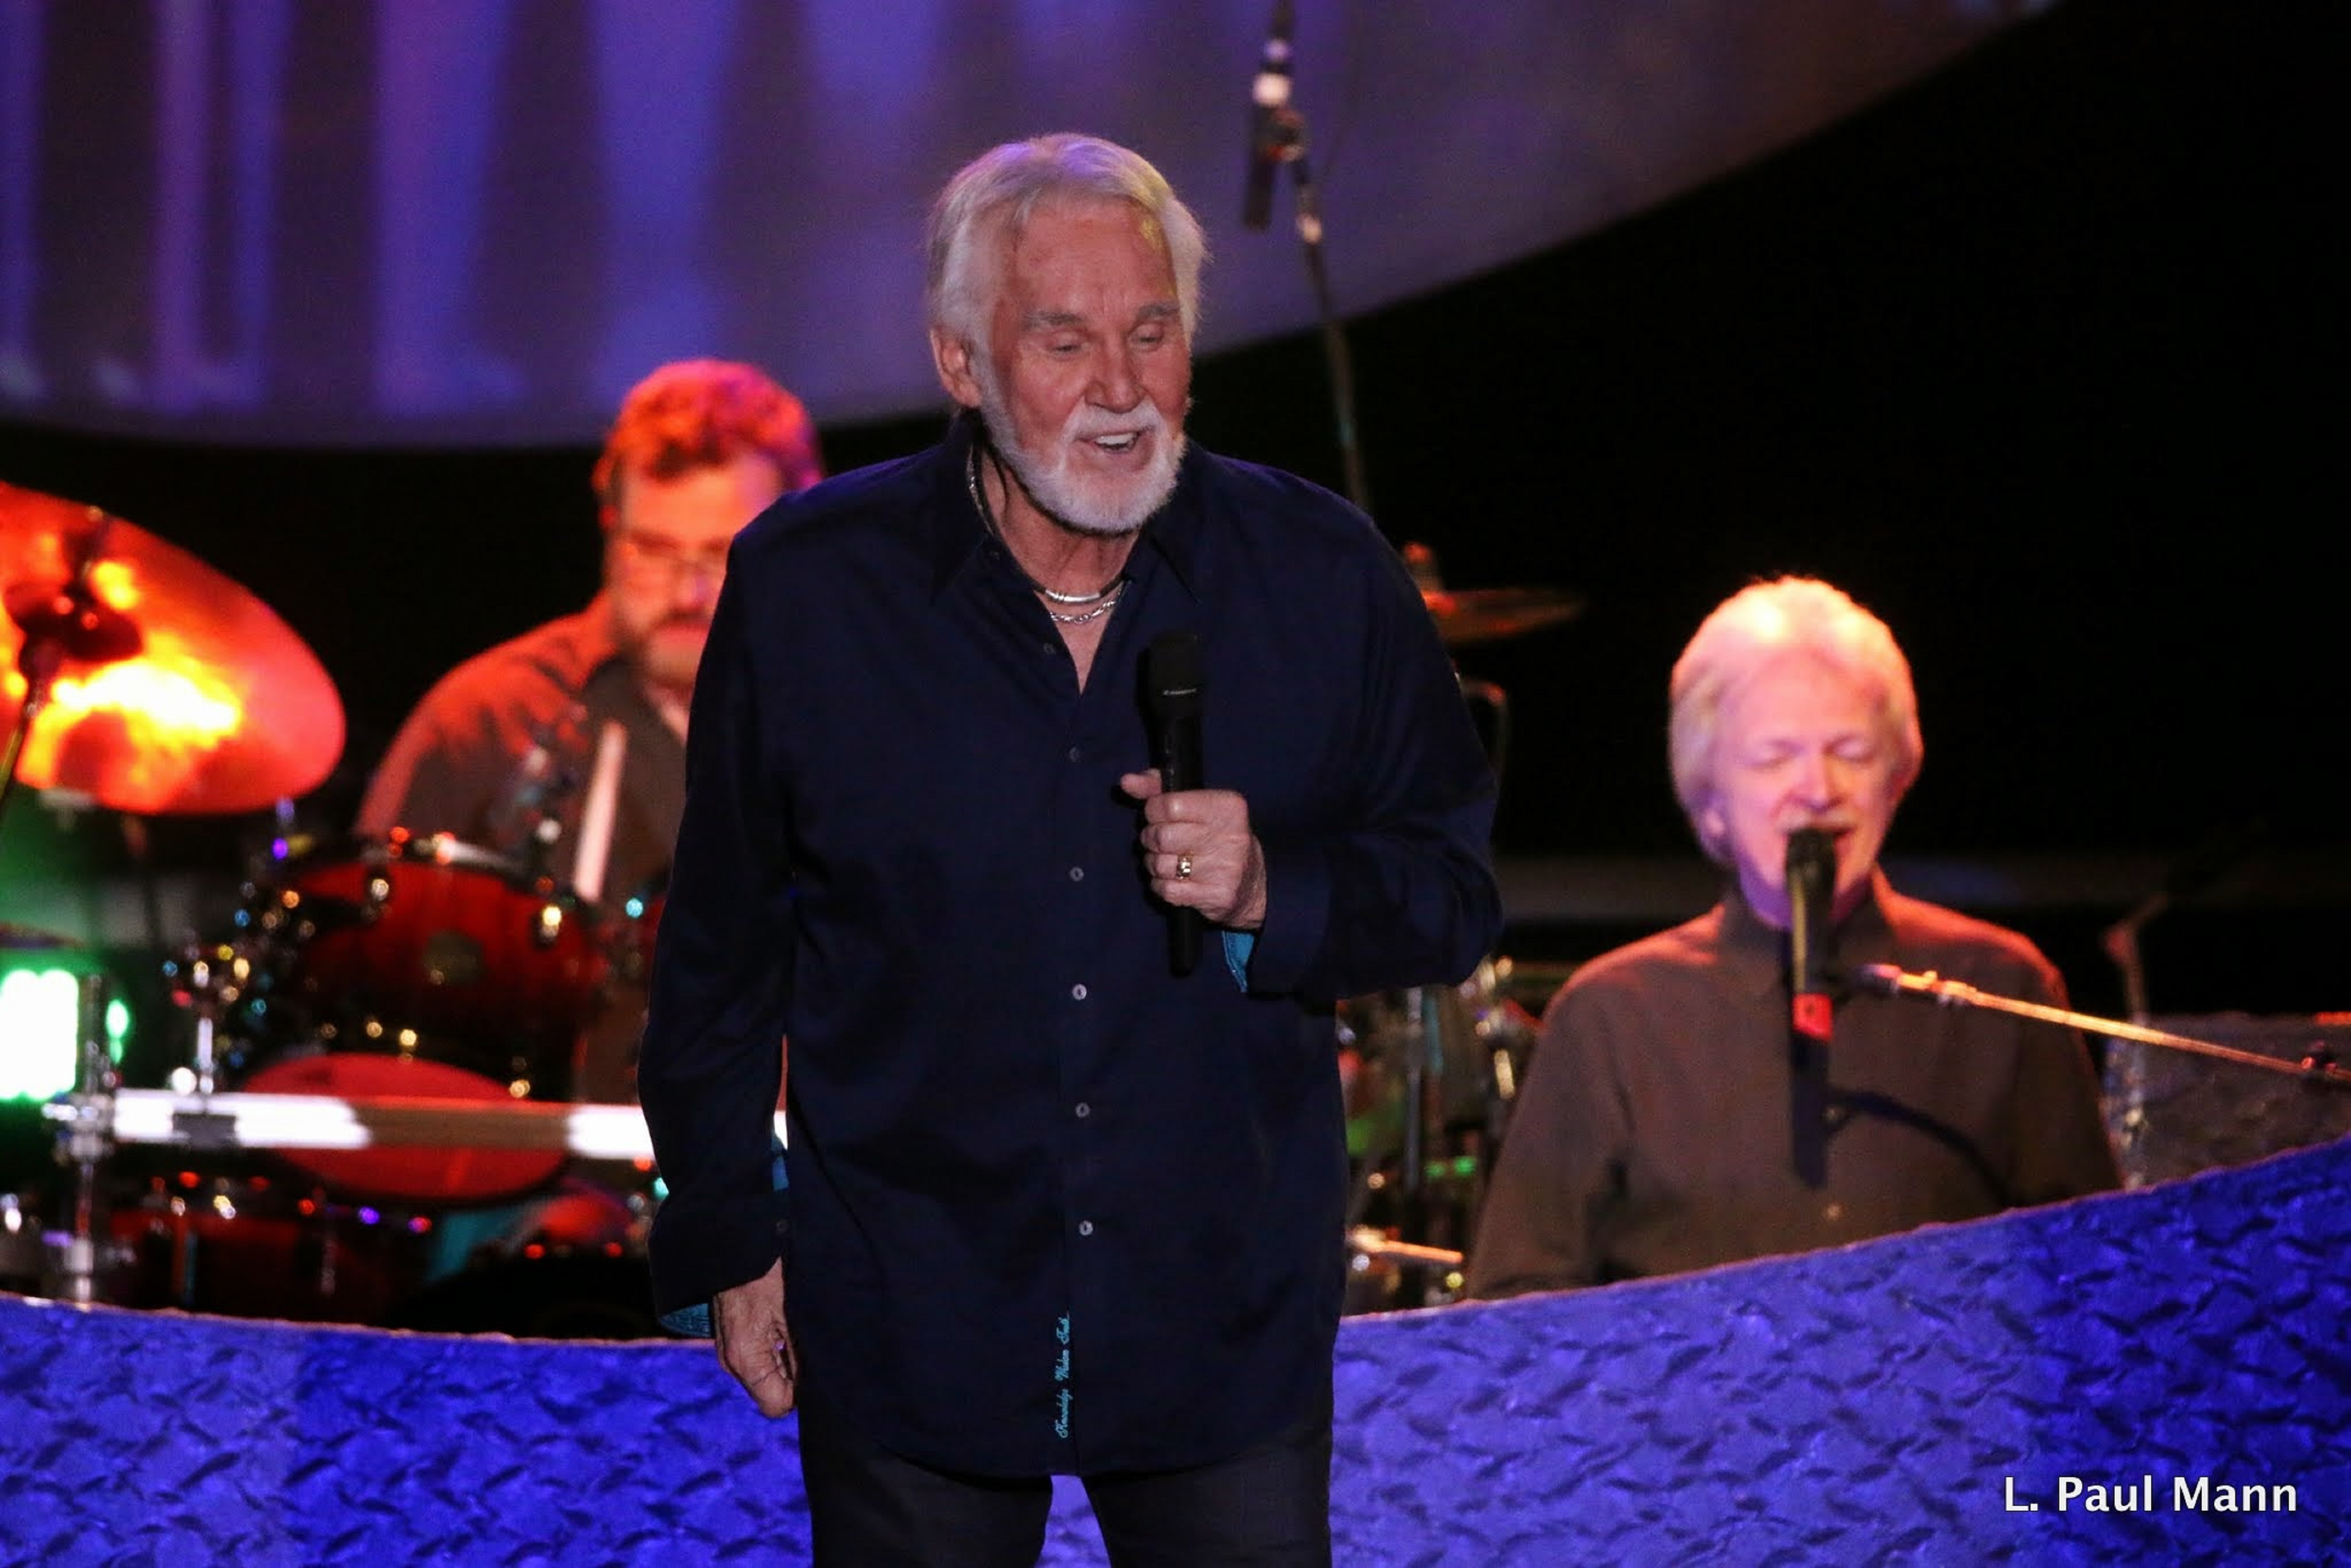 THE LEGENDARY KENNY ROGERS REMEMBERED BY HIS PEERS